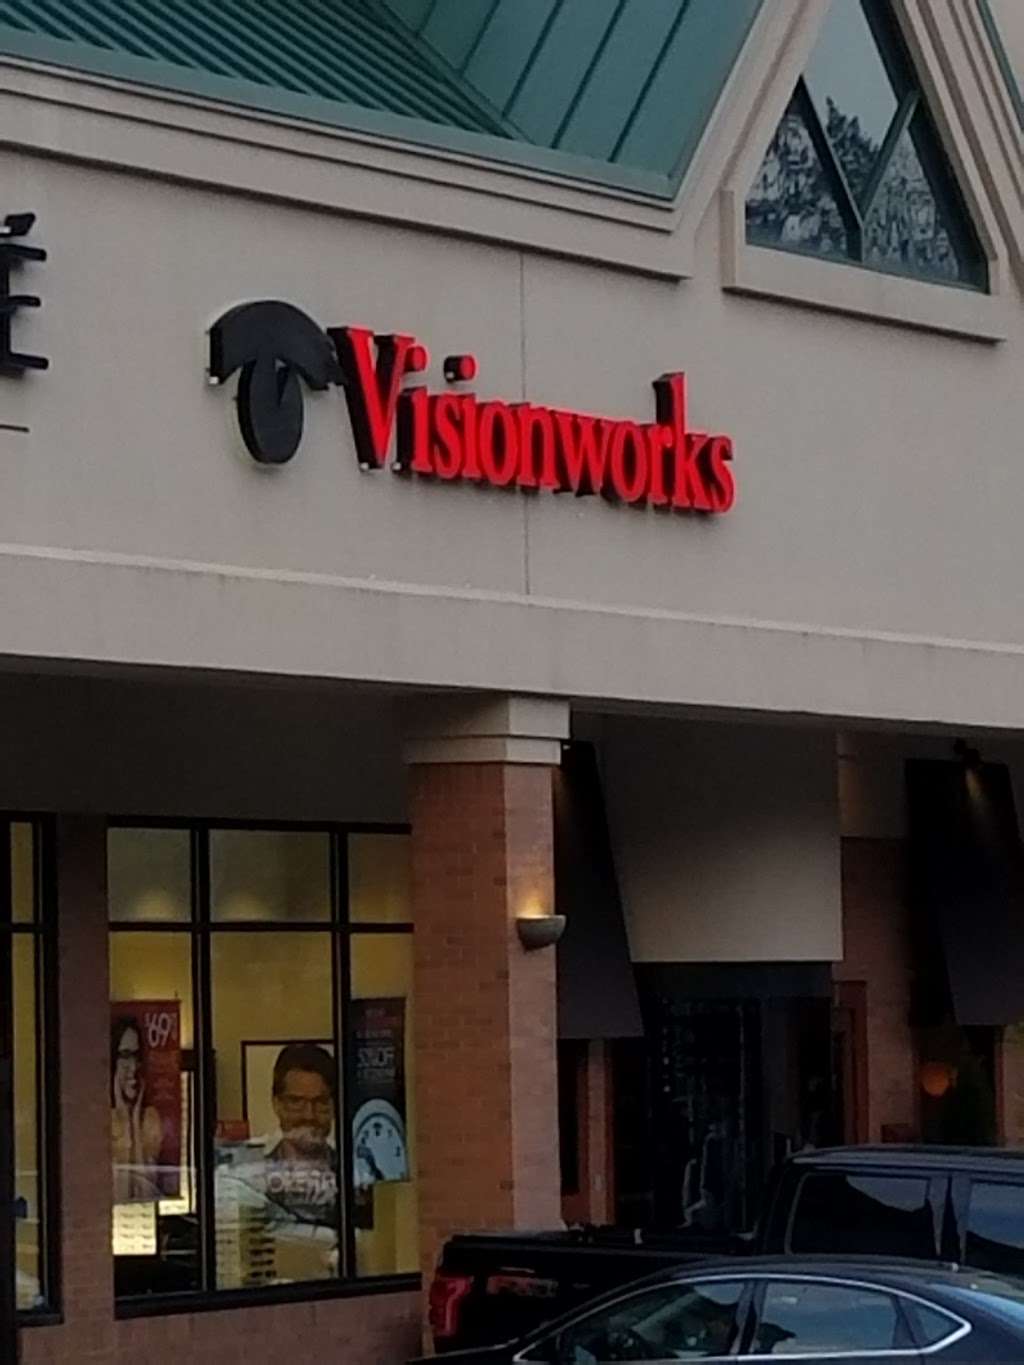 Visionworks | 4891 West Chester Pike, Newtown Square, PA 19073 | Phone: (610) 359-8131